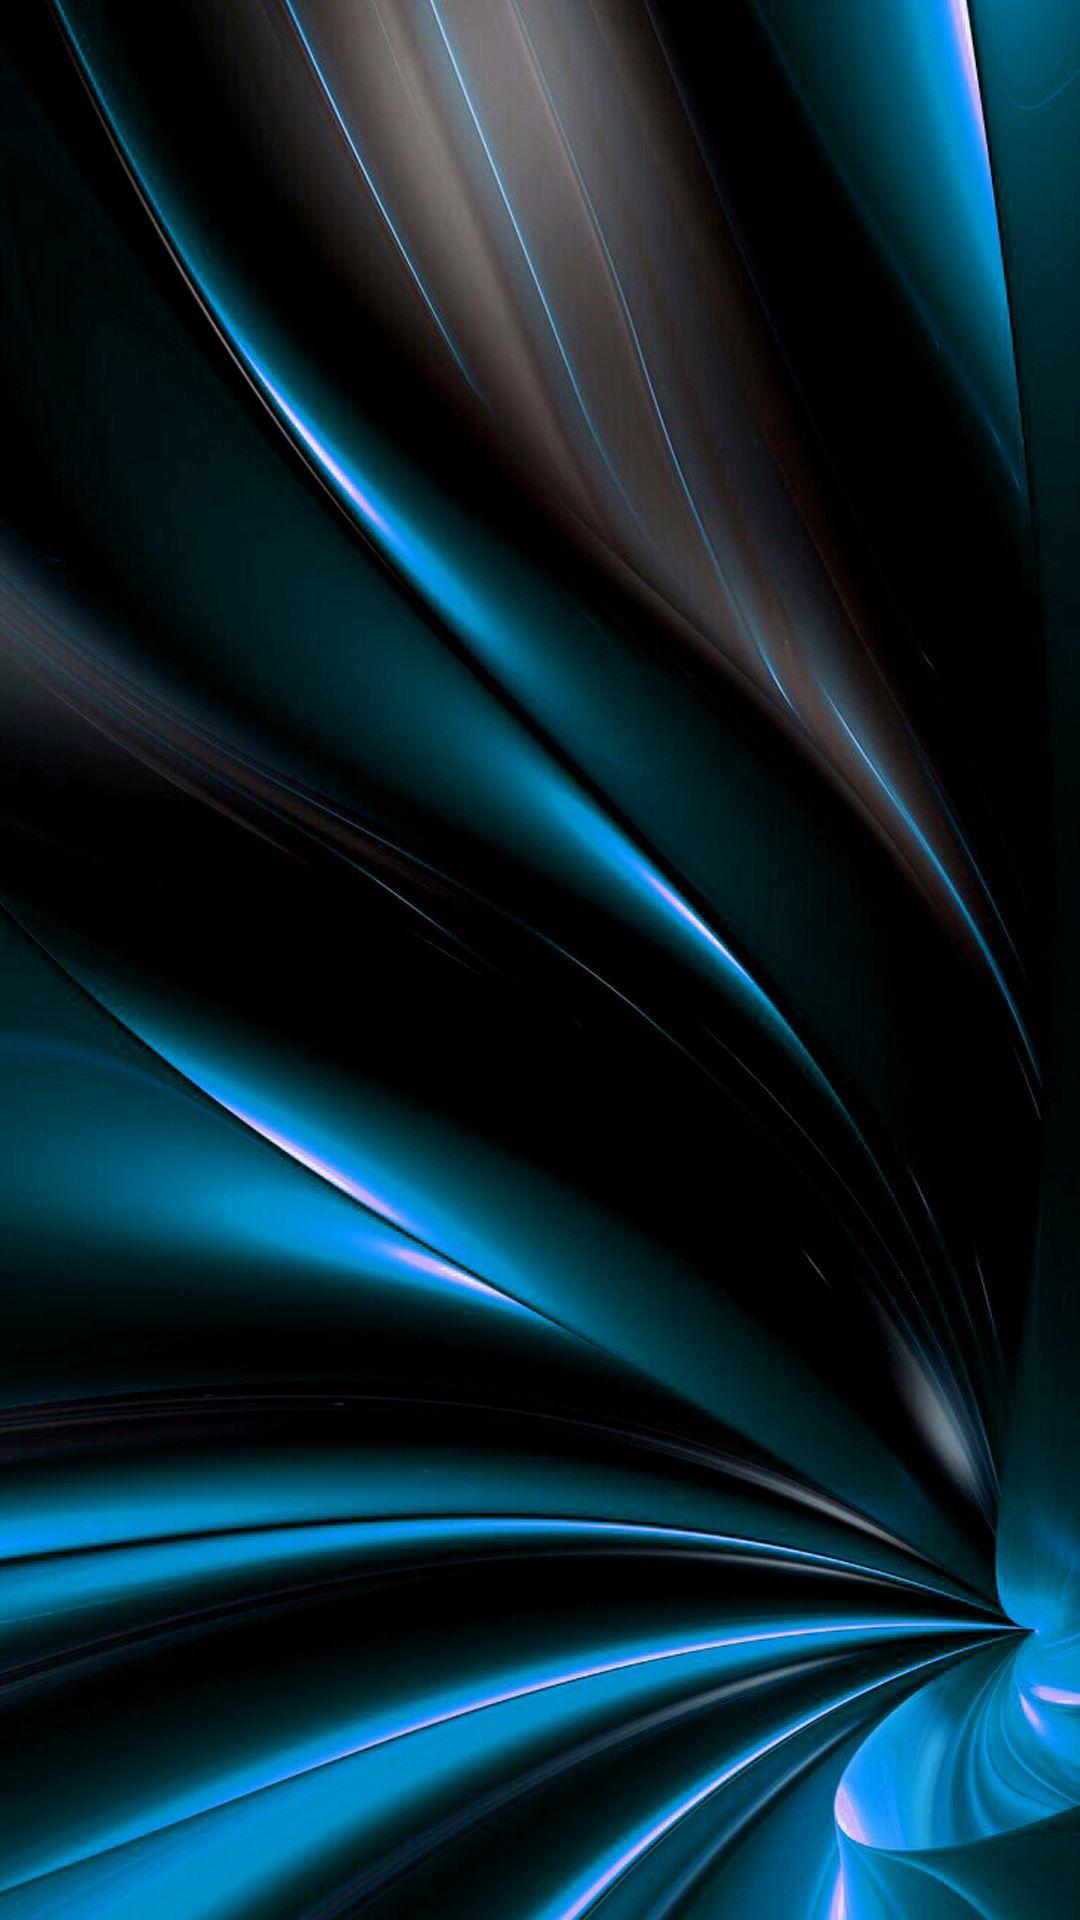 Cool Phone Wallpaper 04 of 10 with Dark Grey Background for OnePlus 3 Wallpaper. Wallpaper Download. High Resolution Wallpaper. Cool wallpaper for phones, Blue and gold wallpaper, Purple wallpaper phone